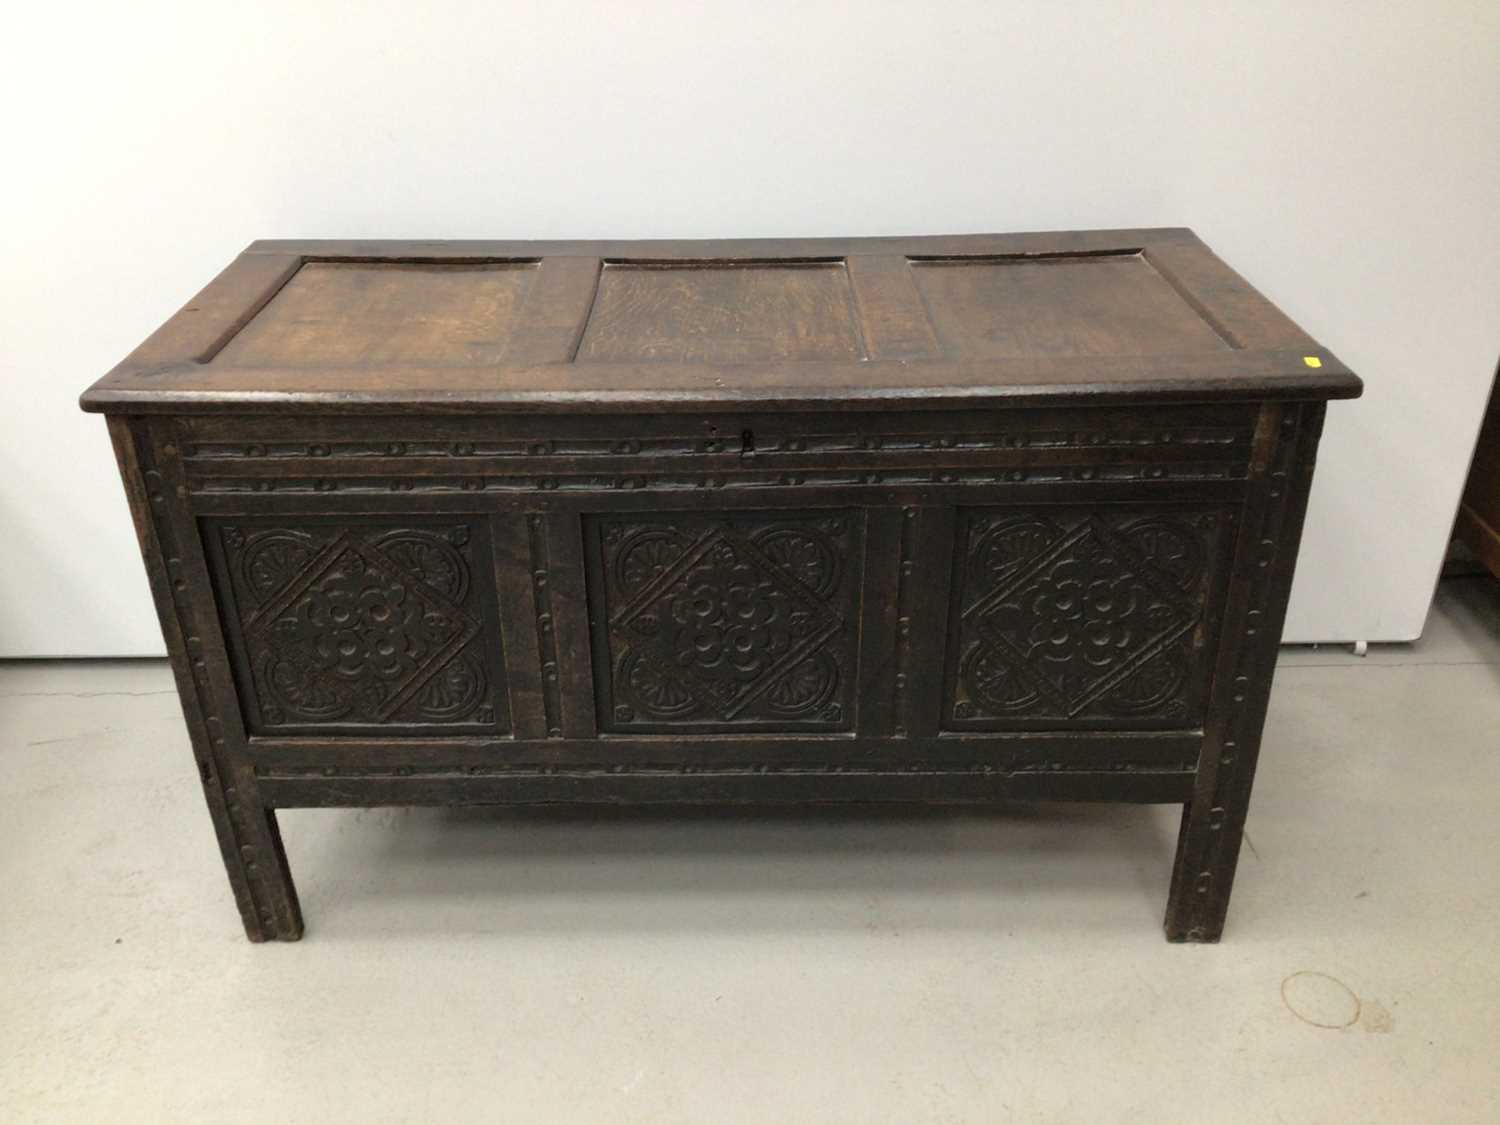 Lot 66 - Good 17th century oak coffer, with triple panel top and lozenge carved triple panel front raised on stiles 120cm wide x 53cm deep x 70cm high